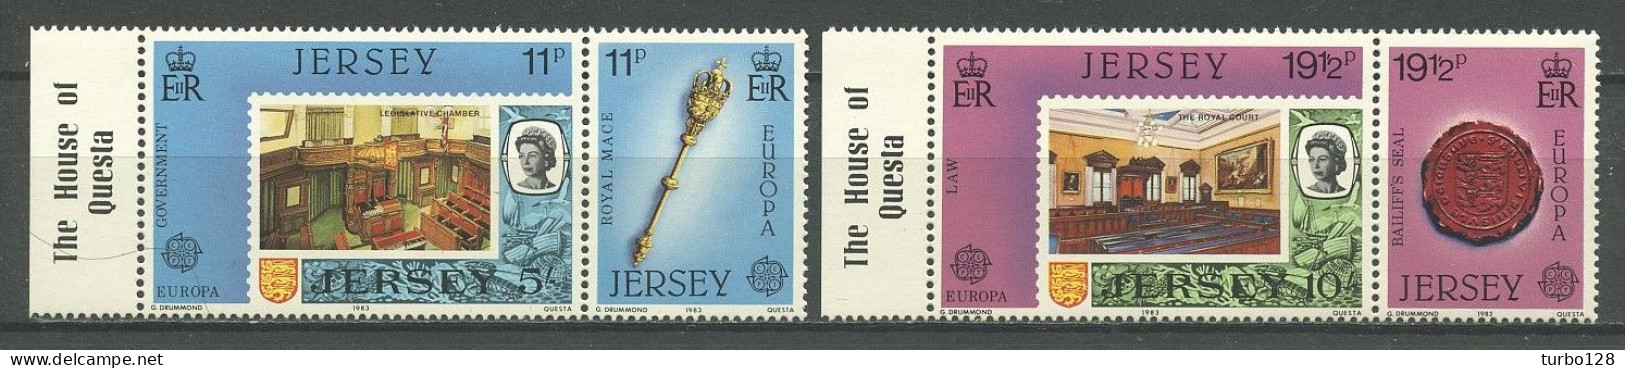 JERSEY 1983 N° 293/296 ** Neufs MNH Superbes C Sceau 4 €  EUROPA Oeuvres Génie Humain Timbres Sur Timbre Loi - Jersey